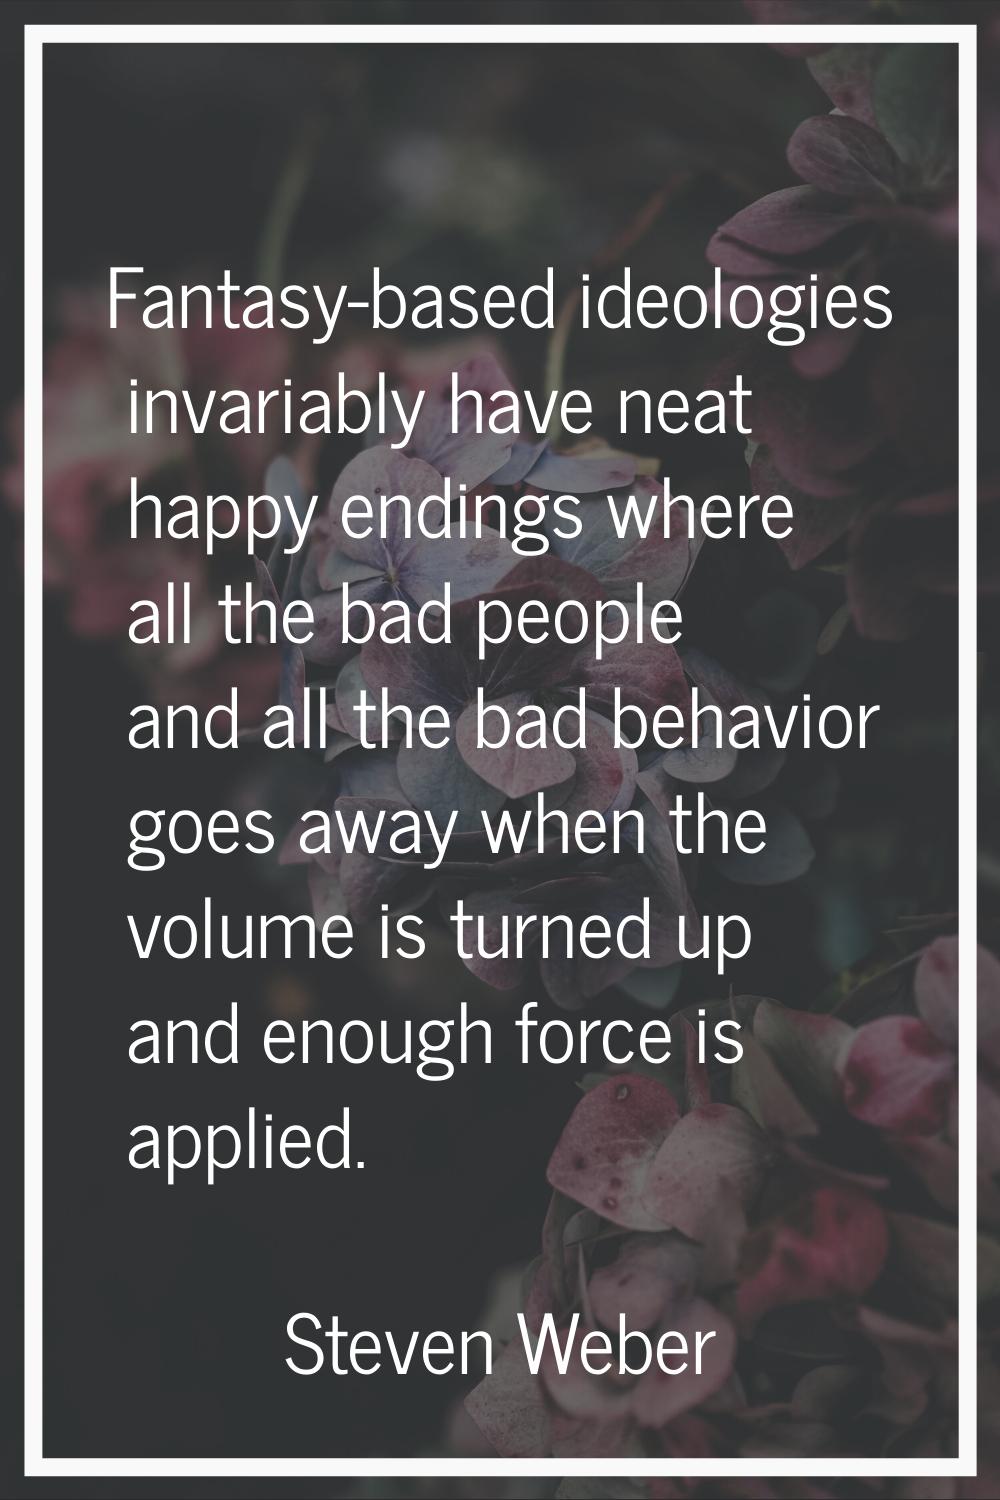 Fantasy-based ideologies invariably have neat happy endings where all the bad people and all the ba